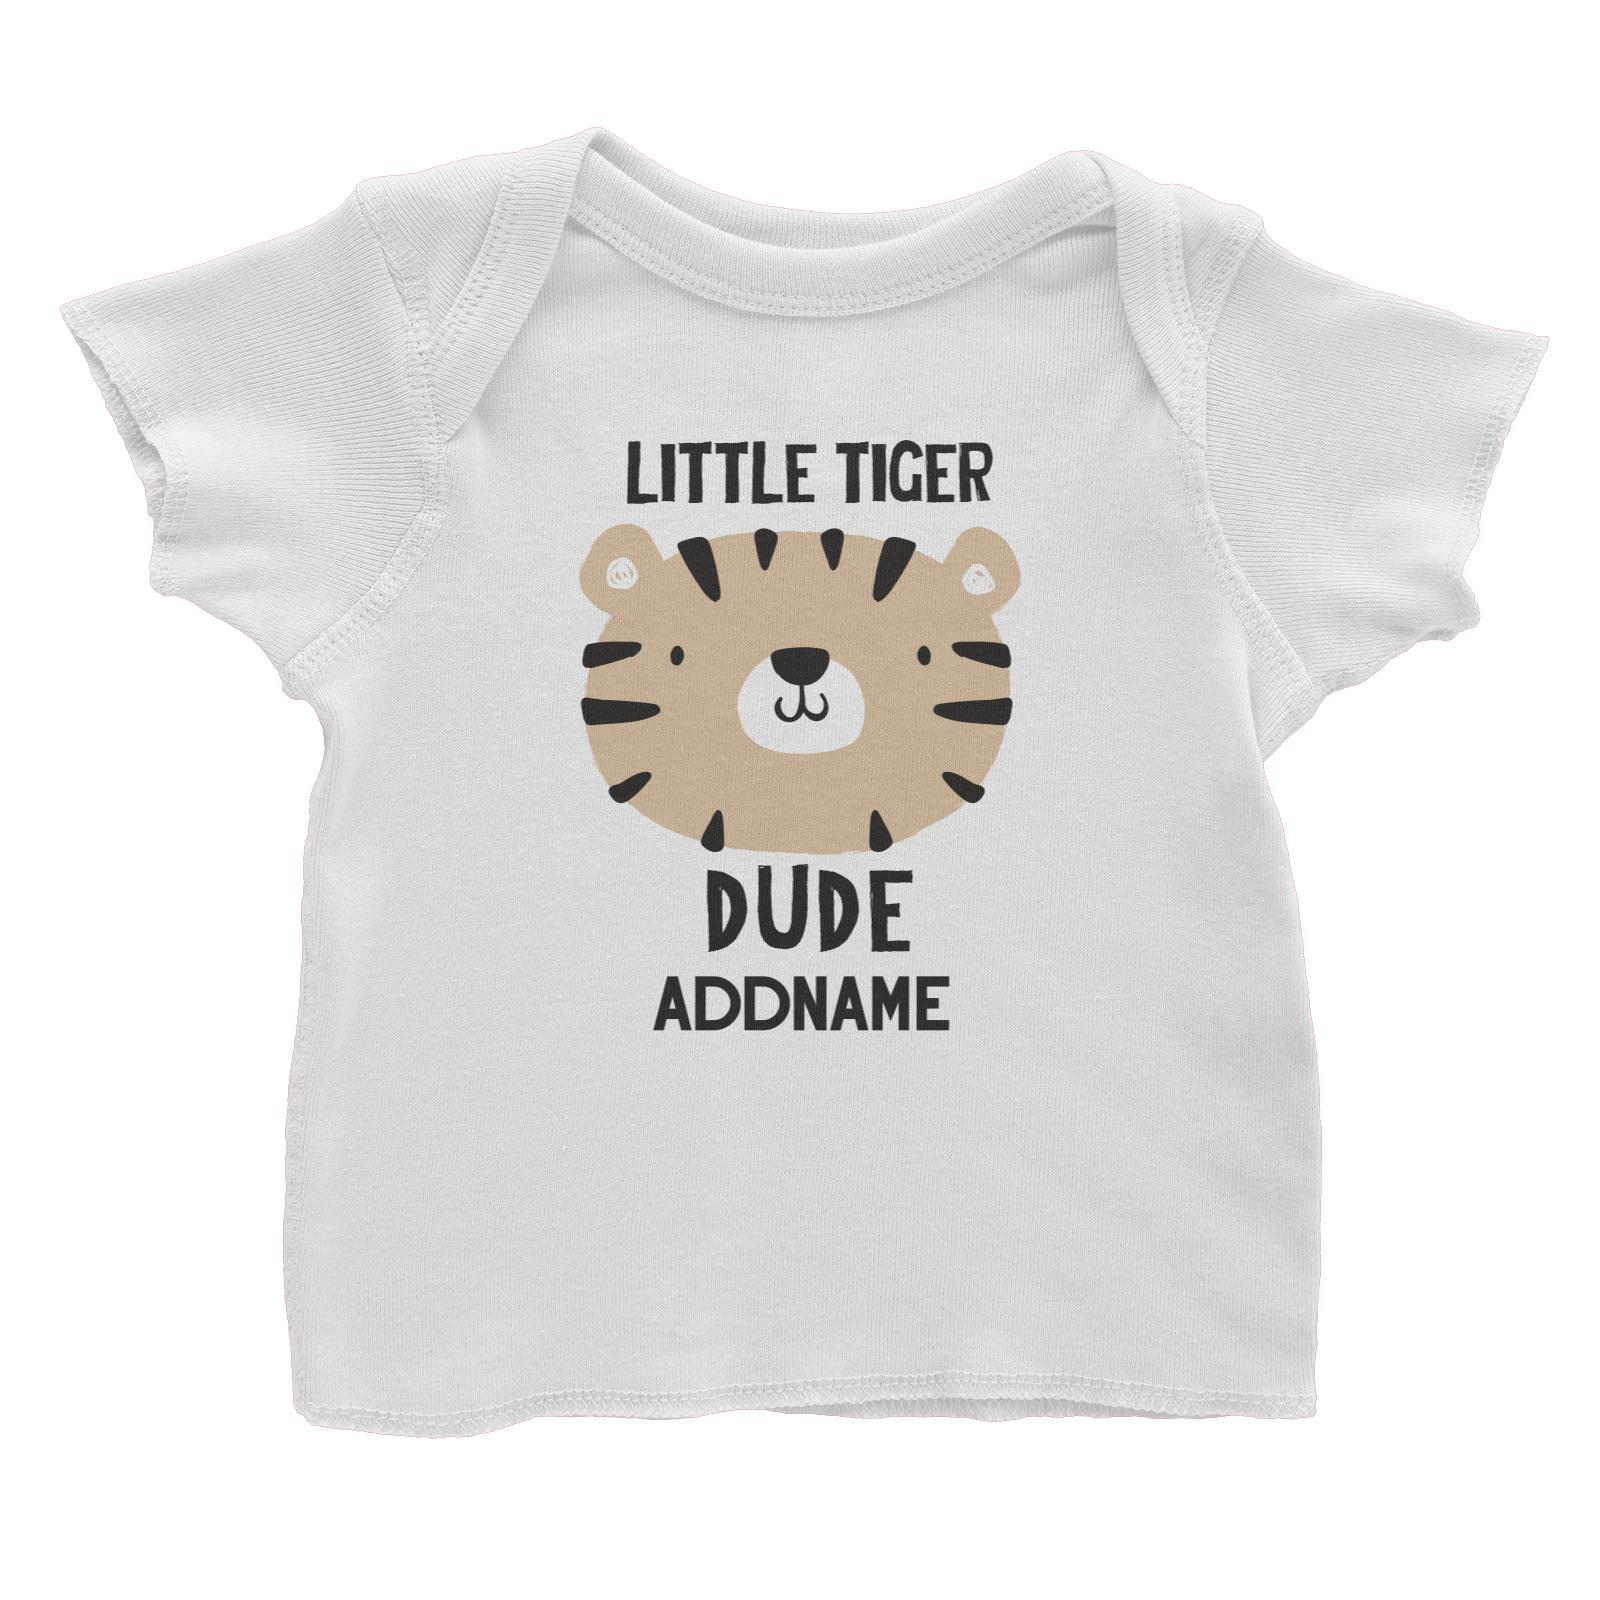 Little Tiger Dude Addname Baby T-Shirt